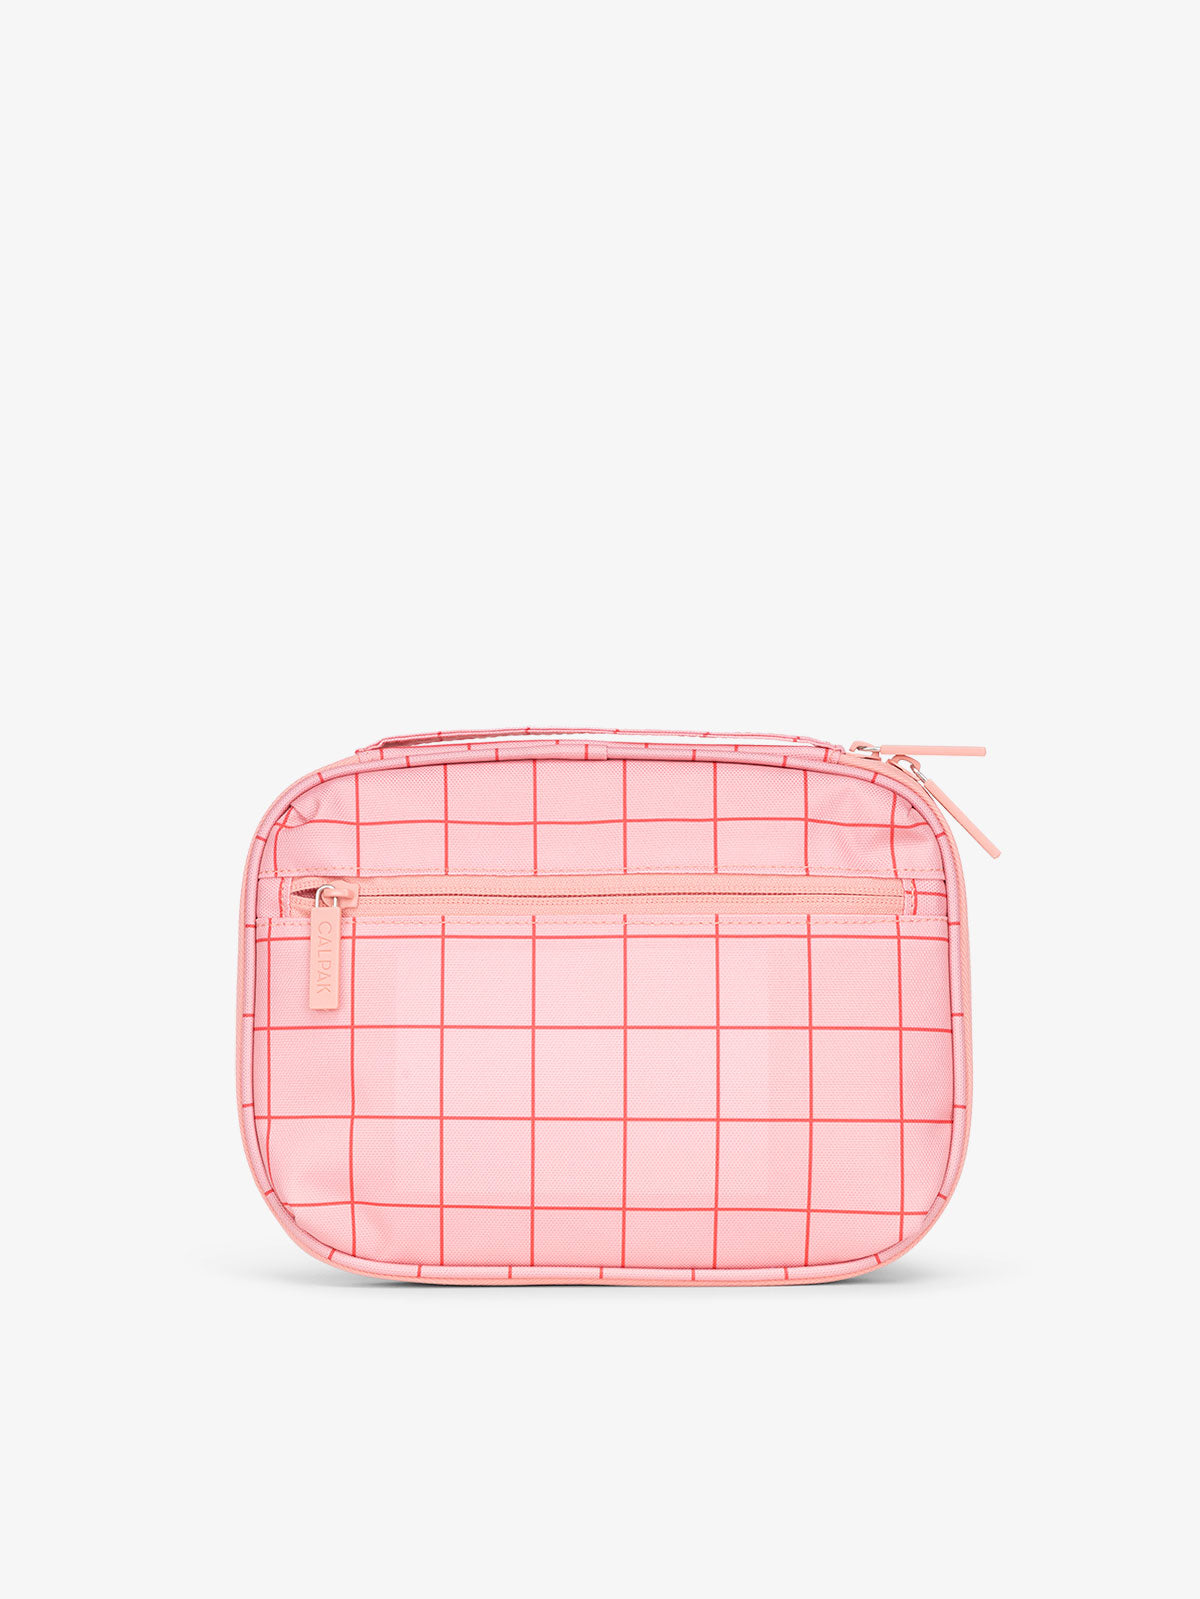 CALPAK tech and cables organizer bag in pink grid